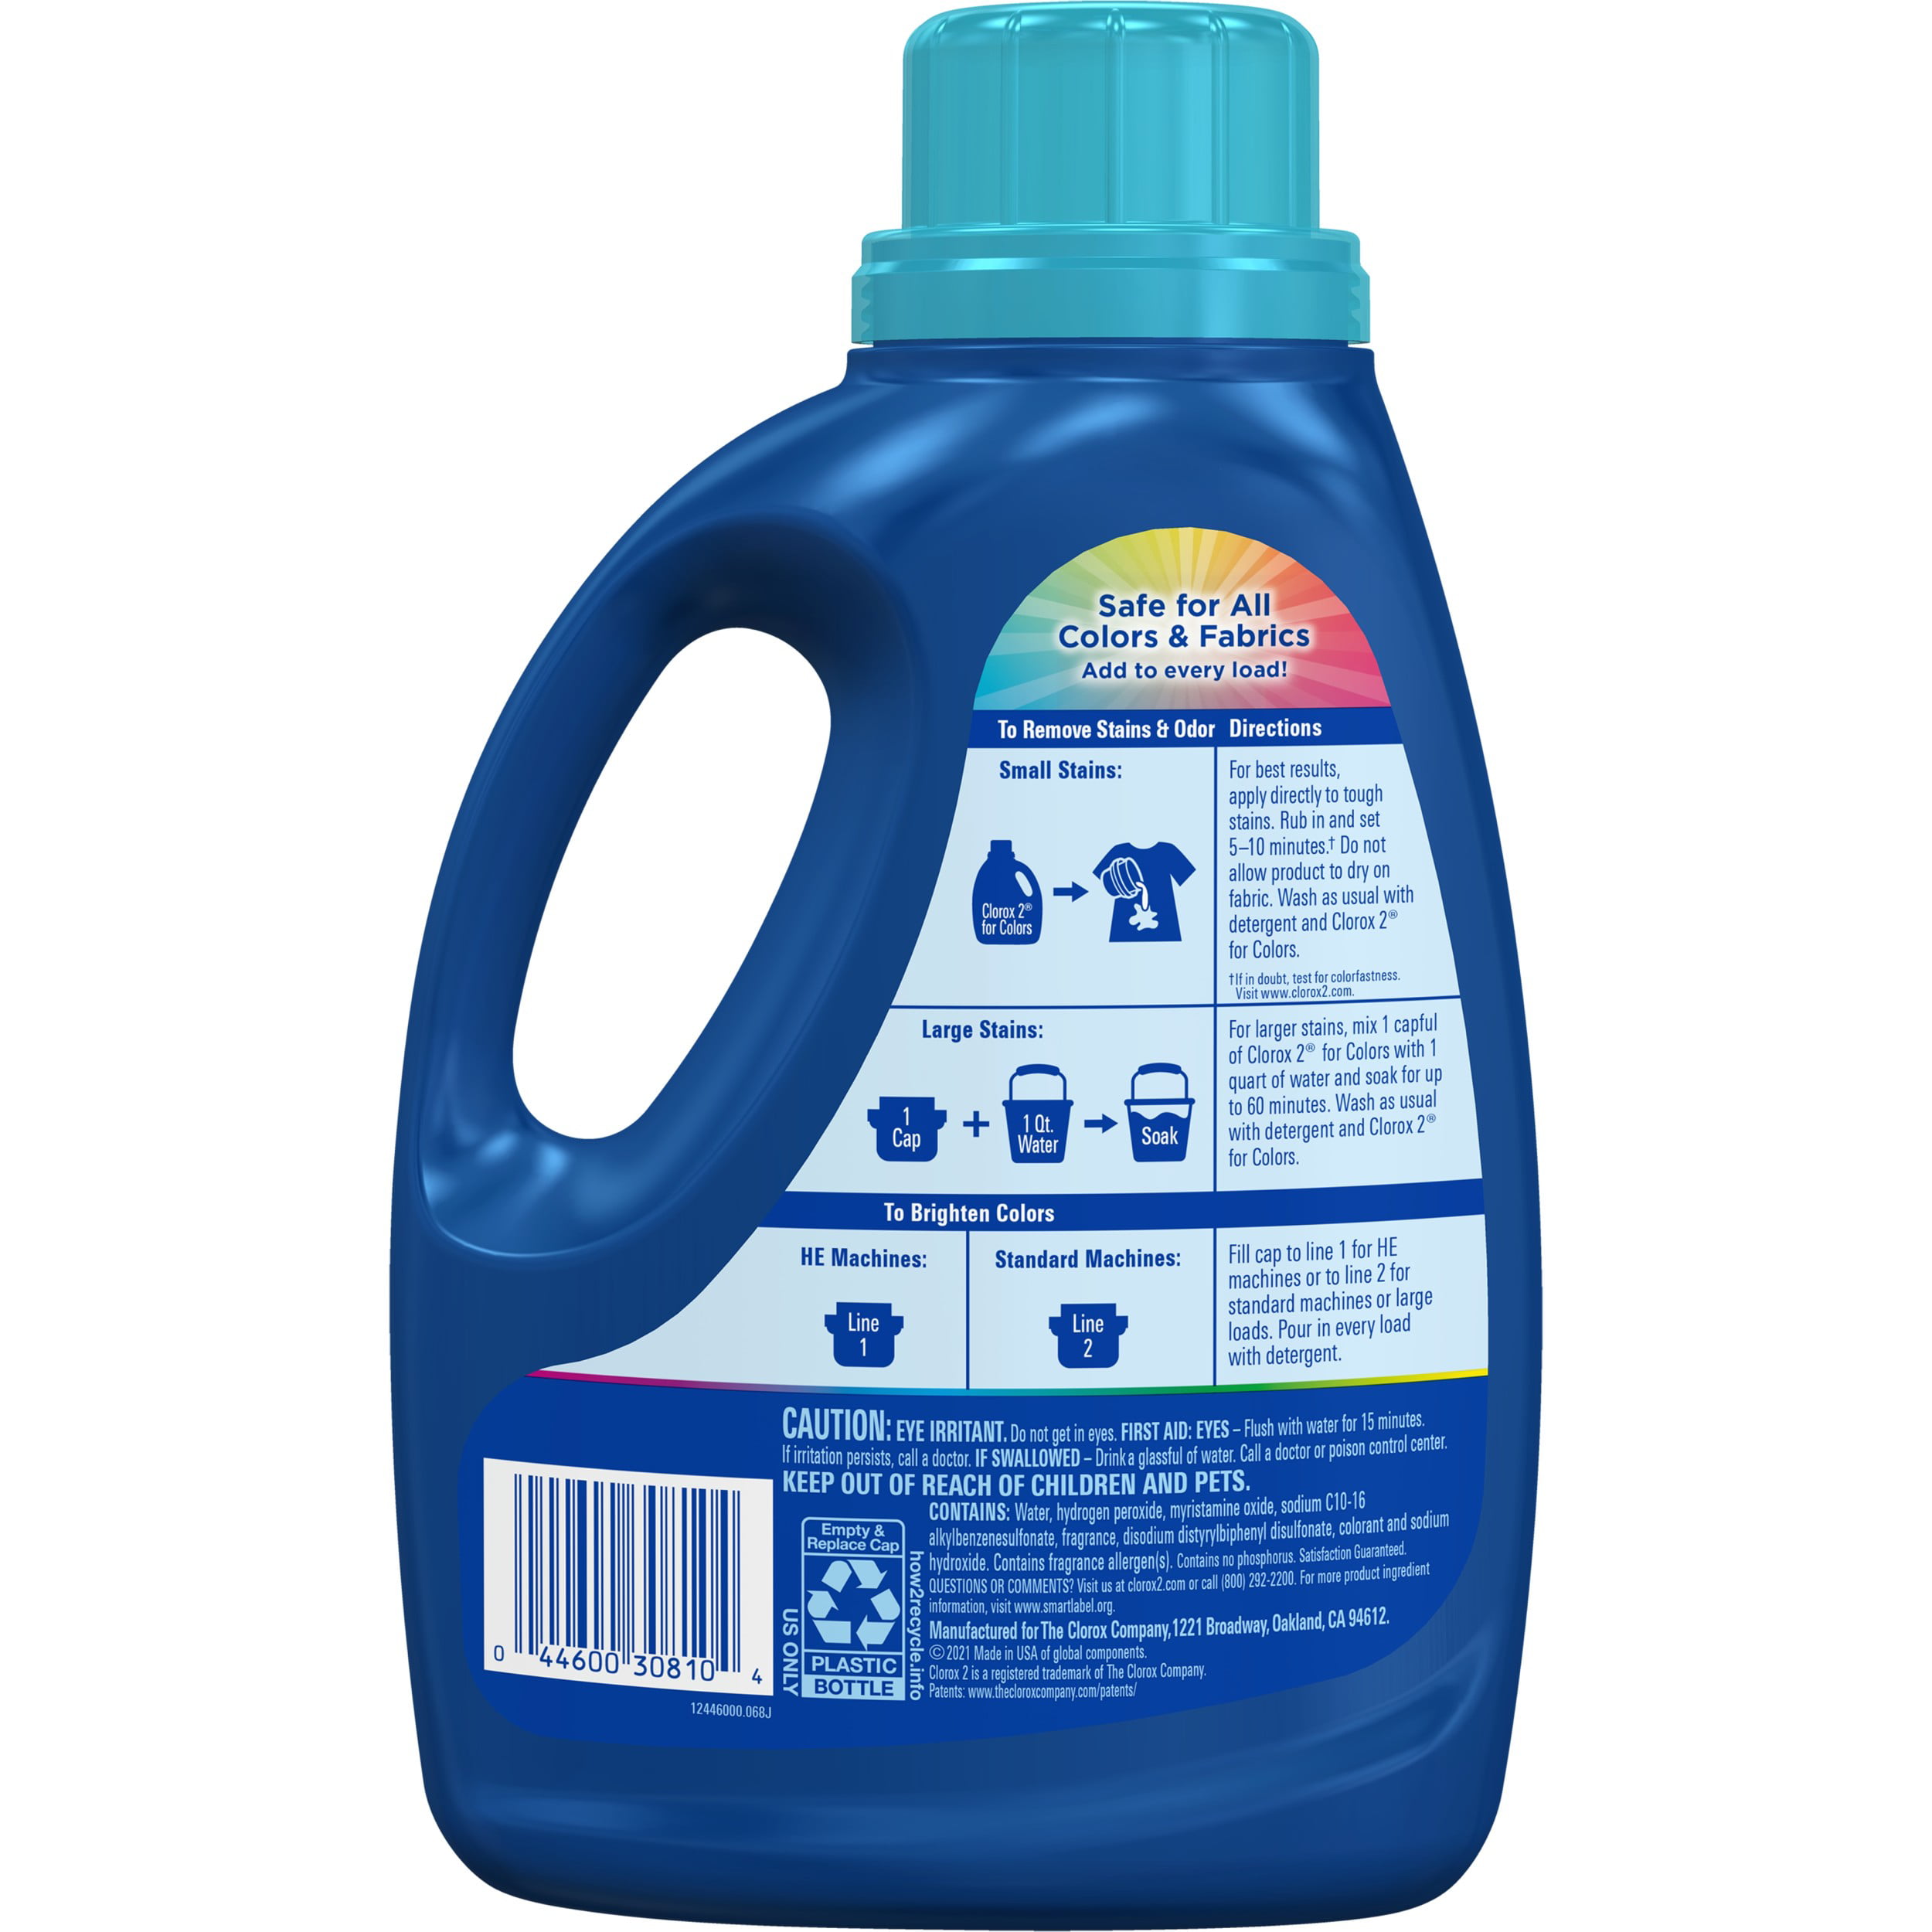 Clorox 2 for Colors Bleach-Free Laundry Stain Remover and Color